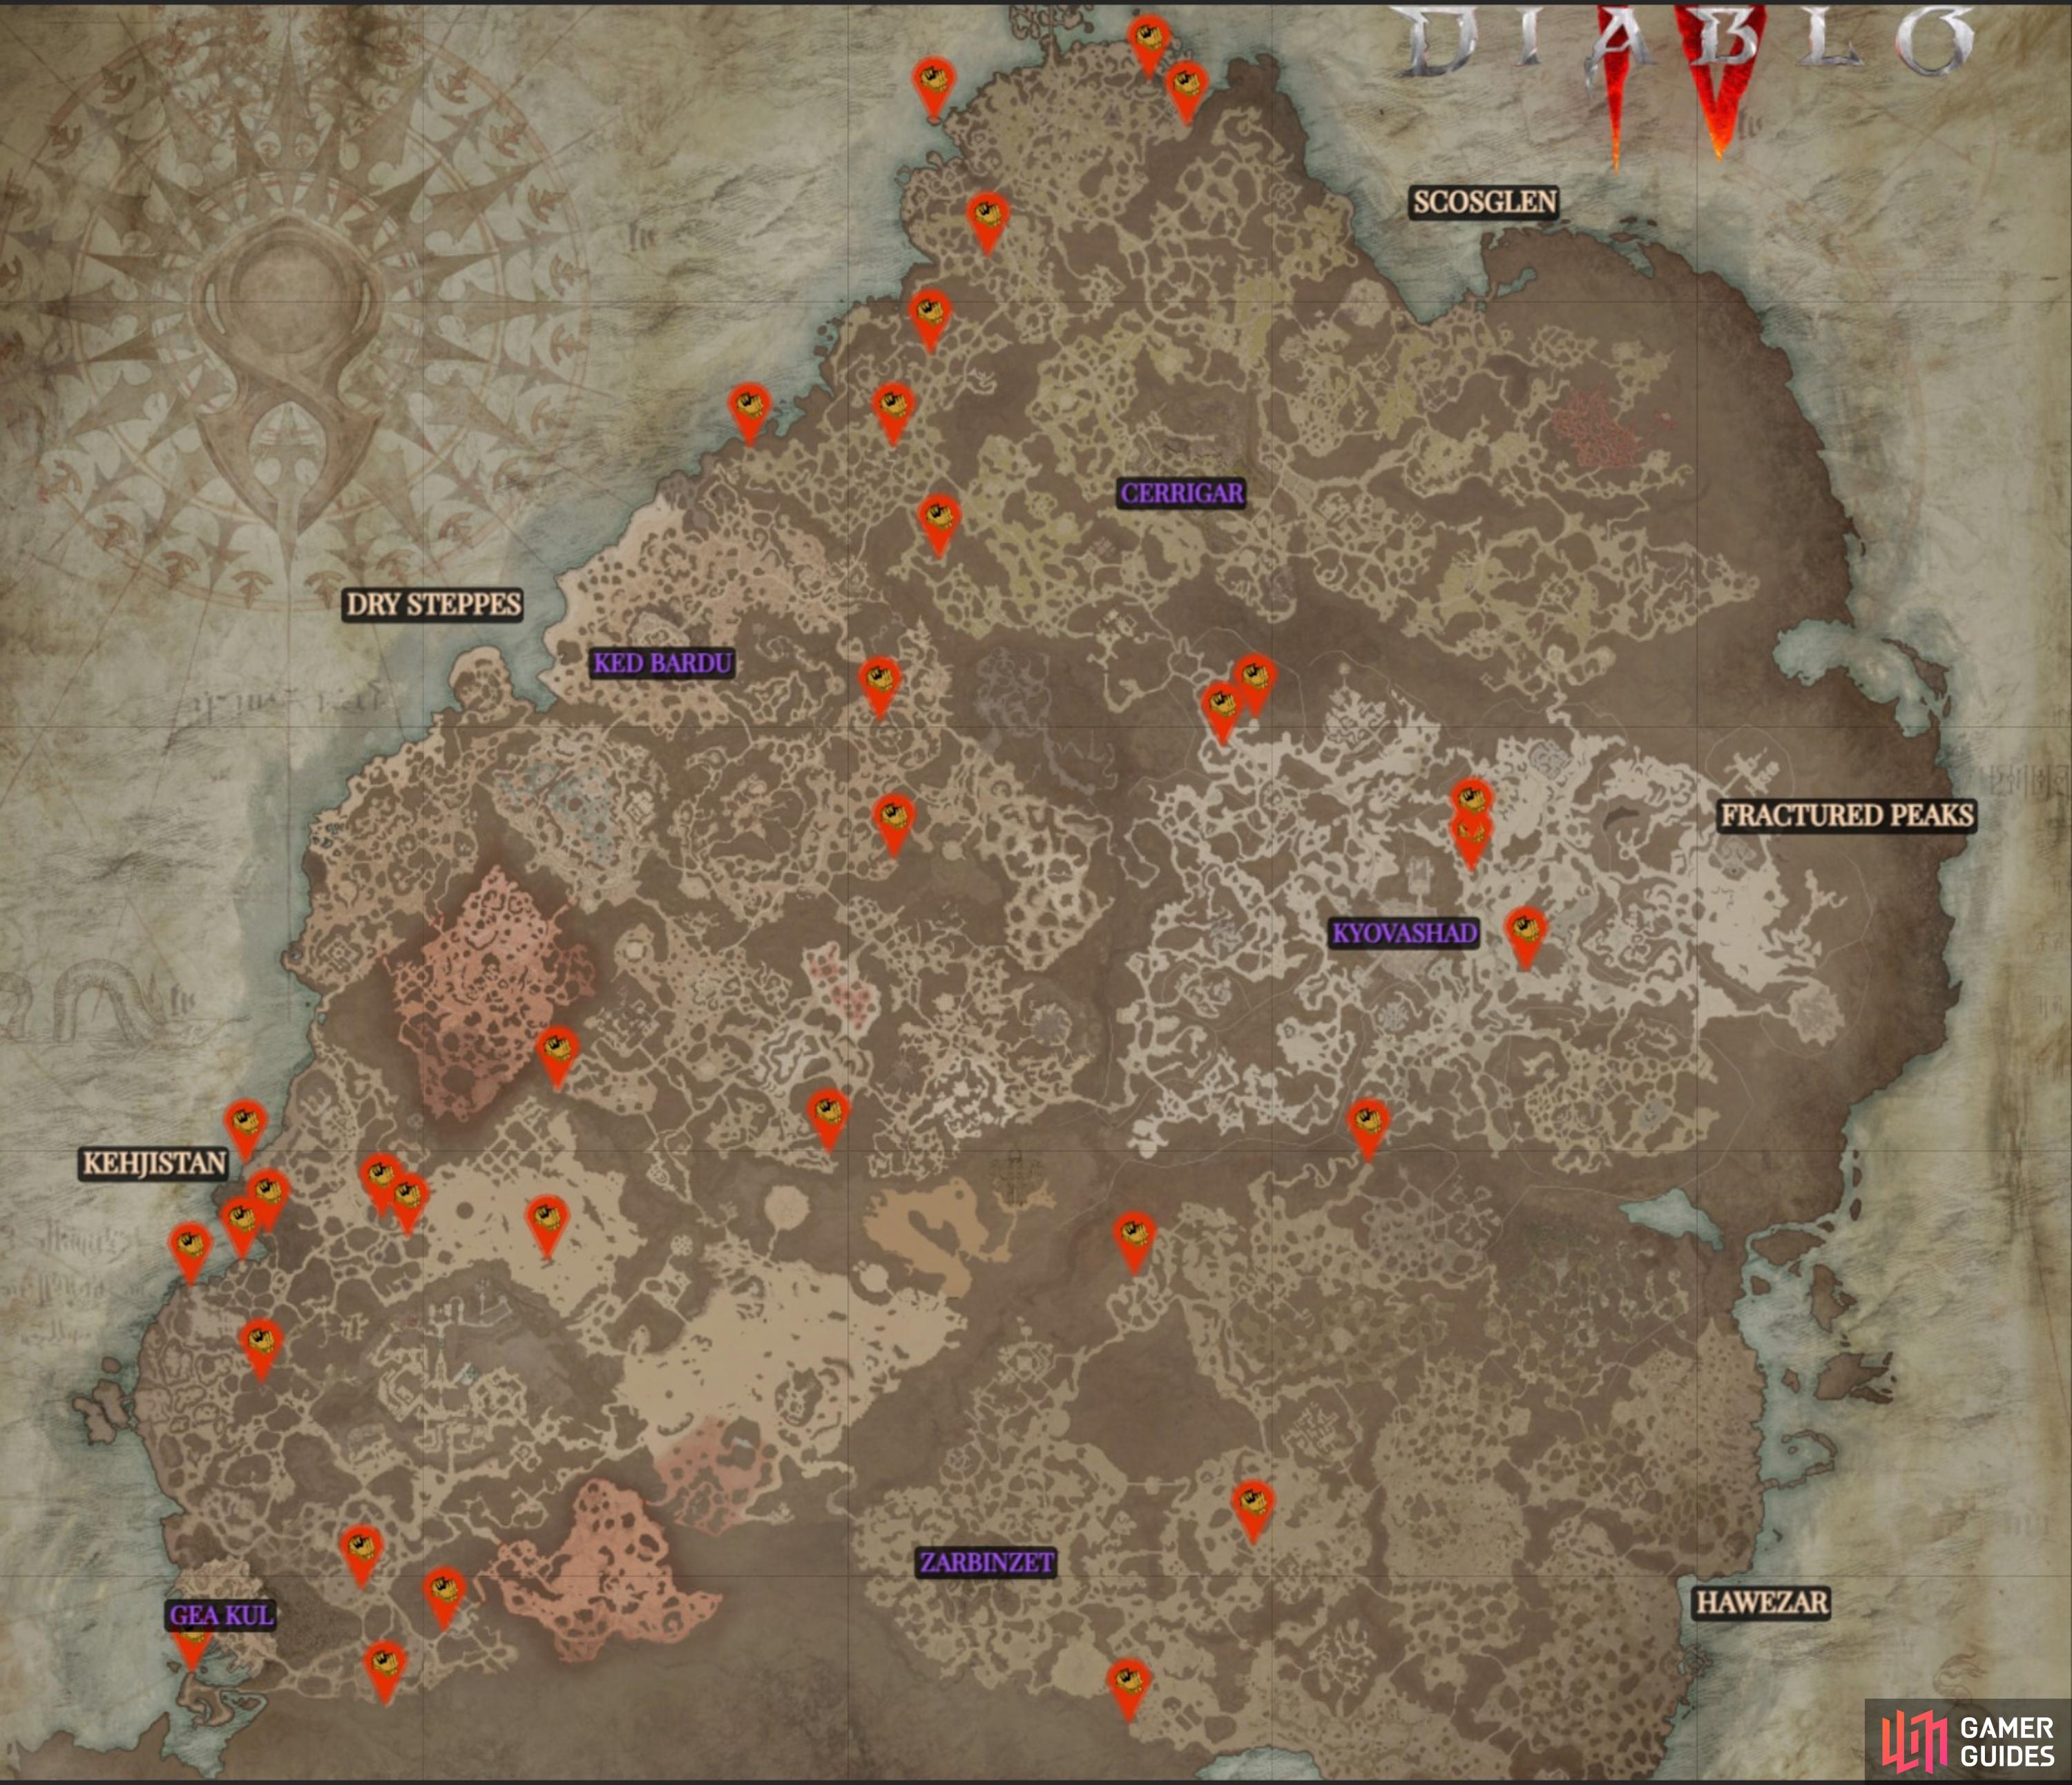 Here is where you can find all the Helltide Mystery Chest Locations in Diablo 4, using our Diablo 4 Interactive Map.